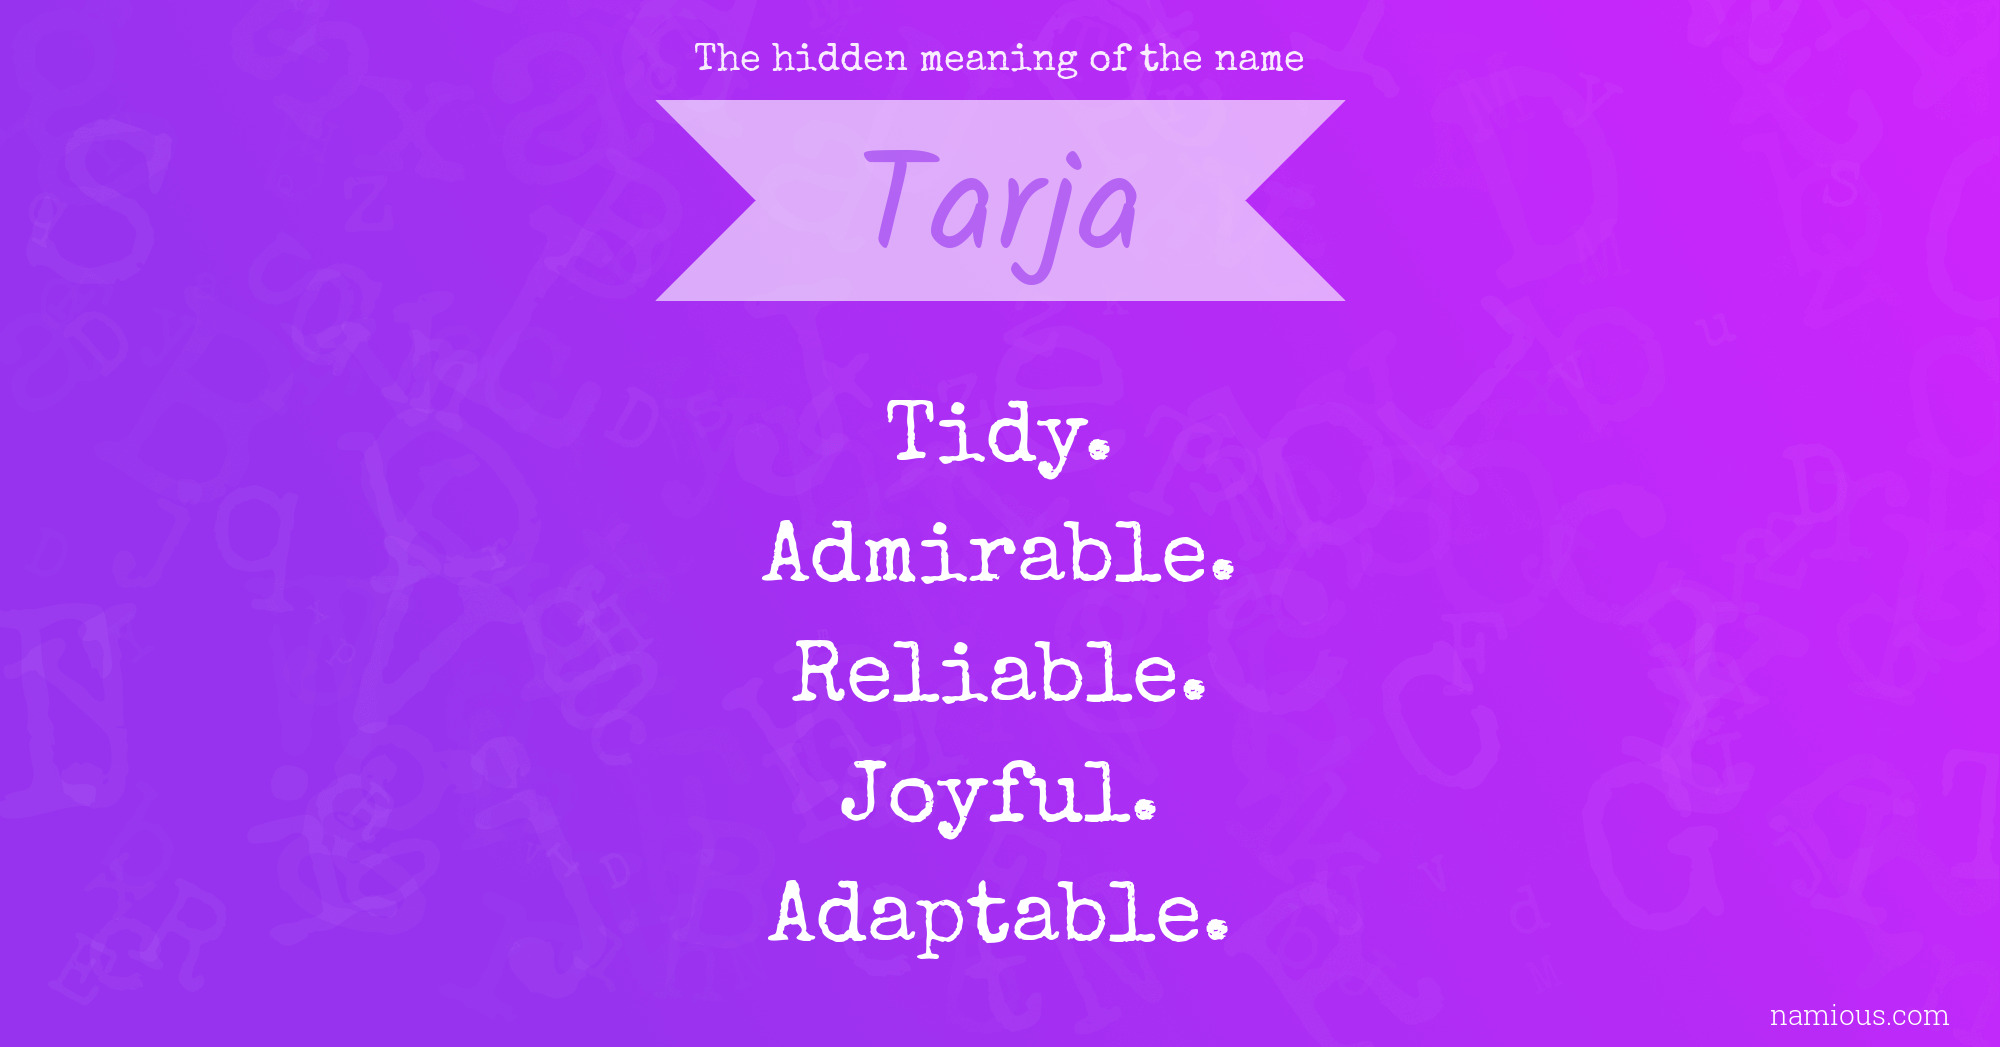 The hidden meaning of the name Tarja